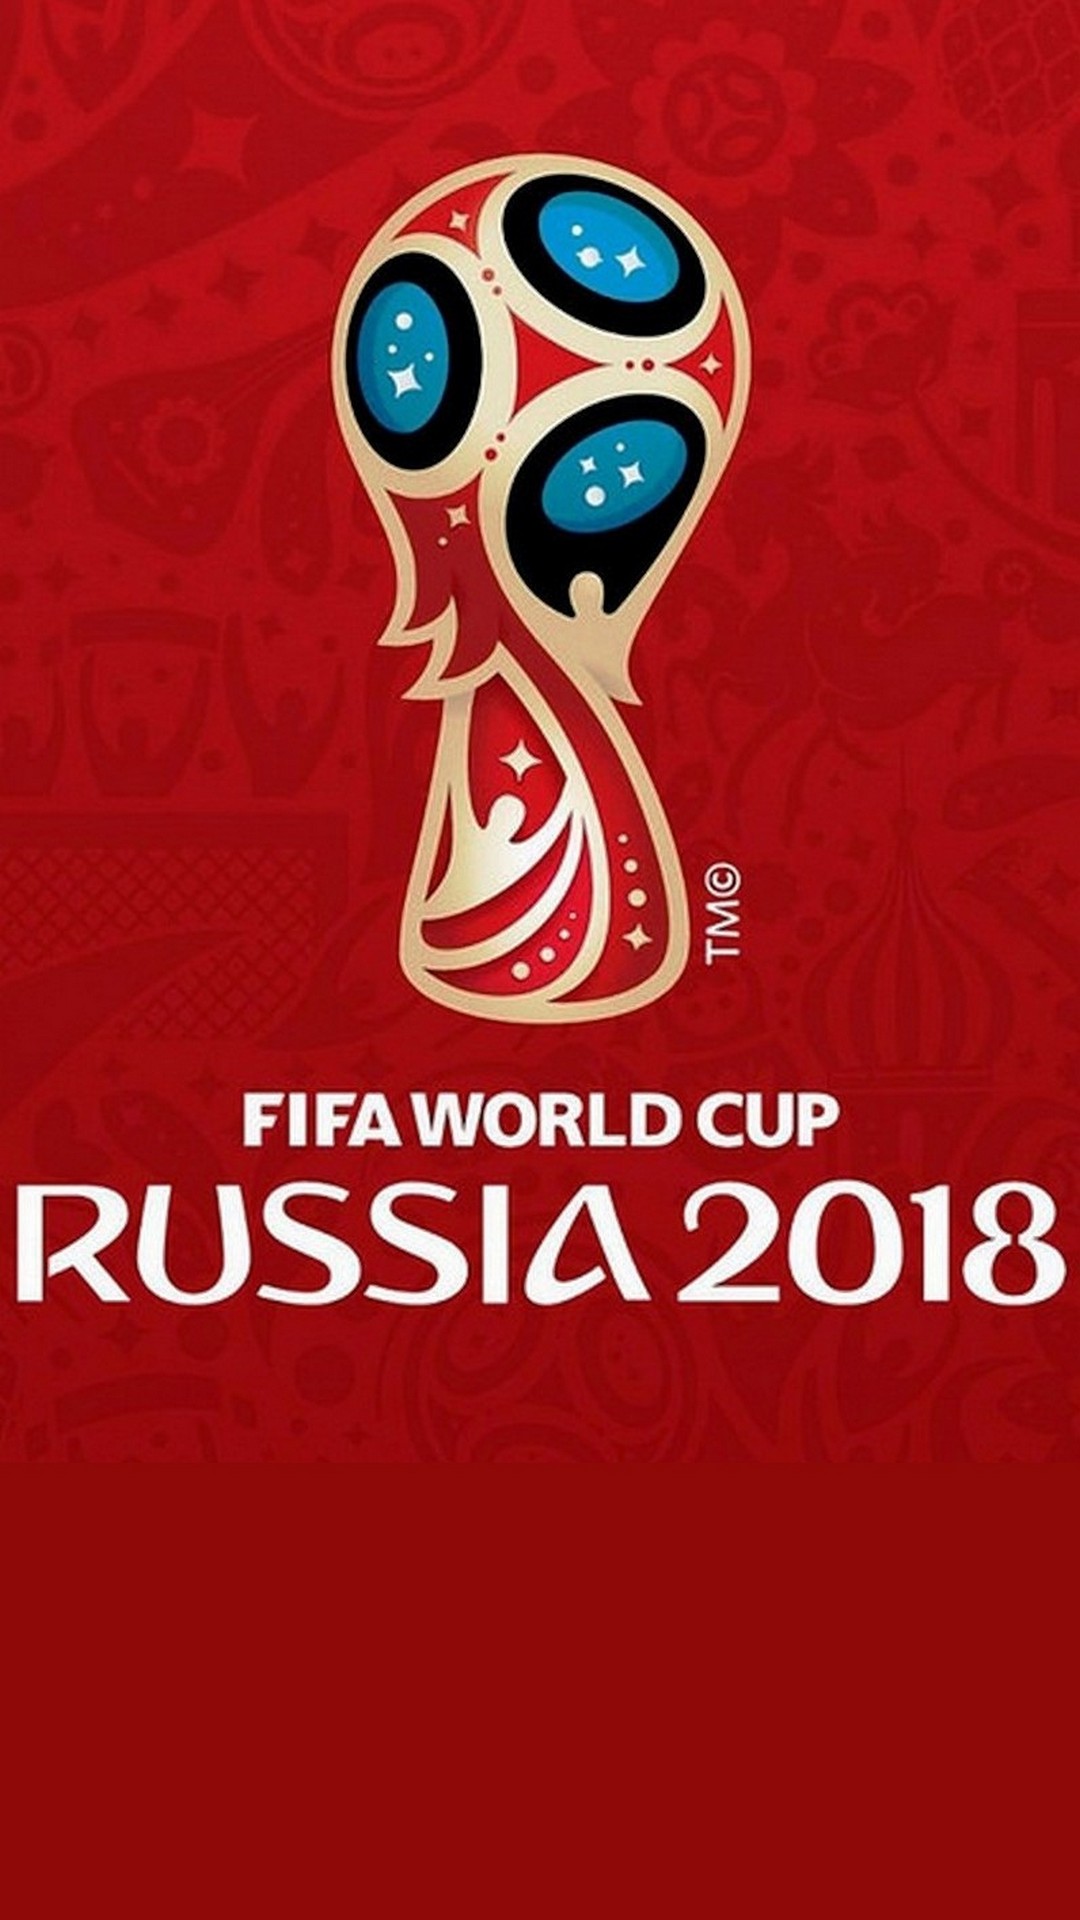 2018 World Cup Wallpaper Android with HD resolution 1080x1920